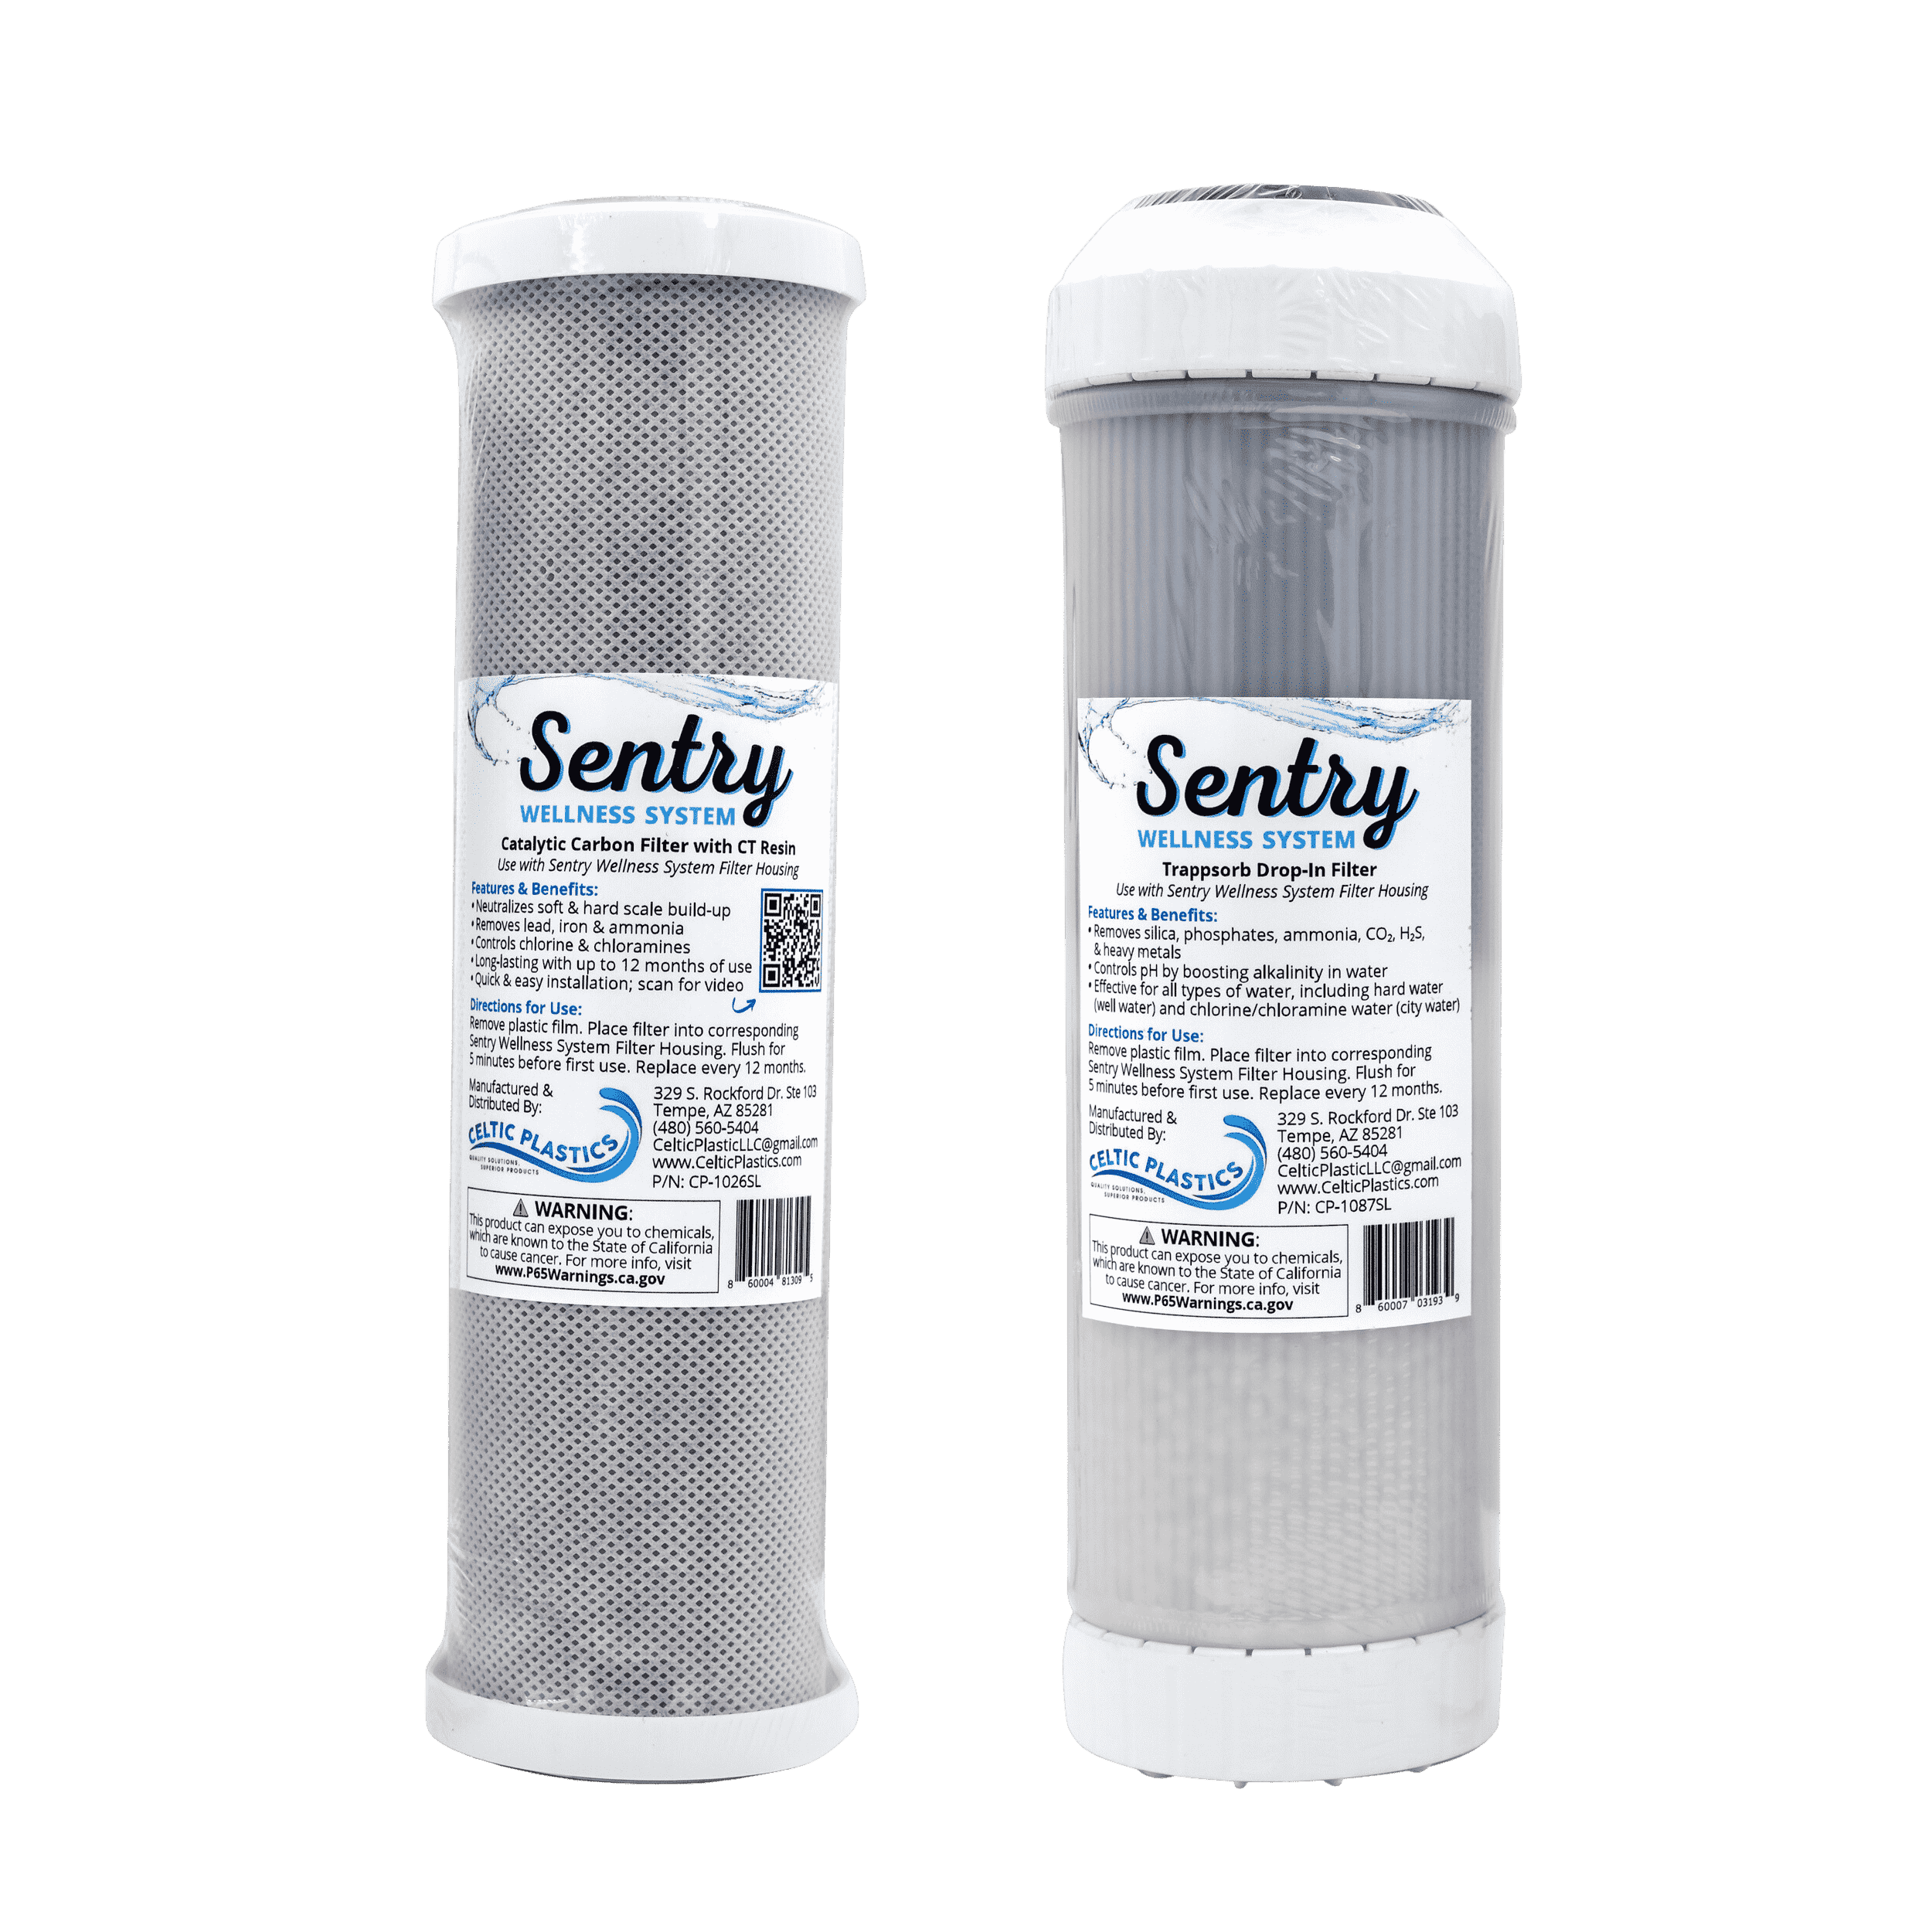 Sentry replaceable carbon and trappsorb filters